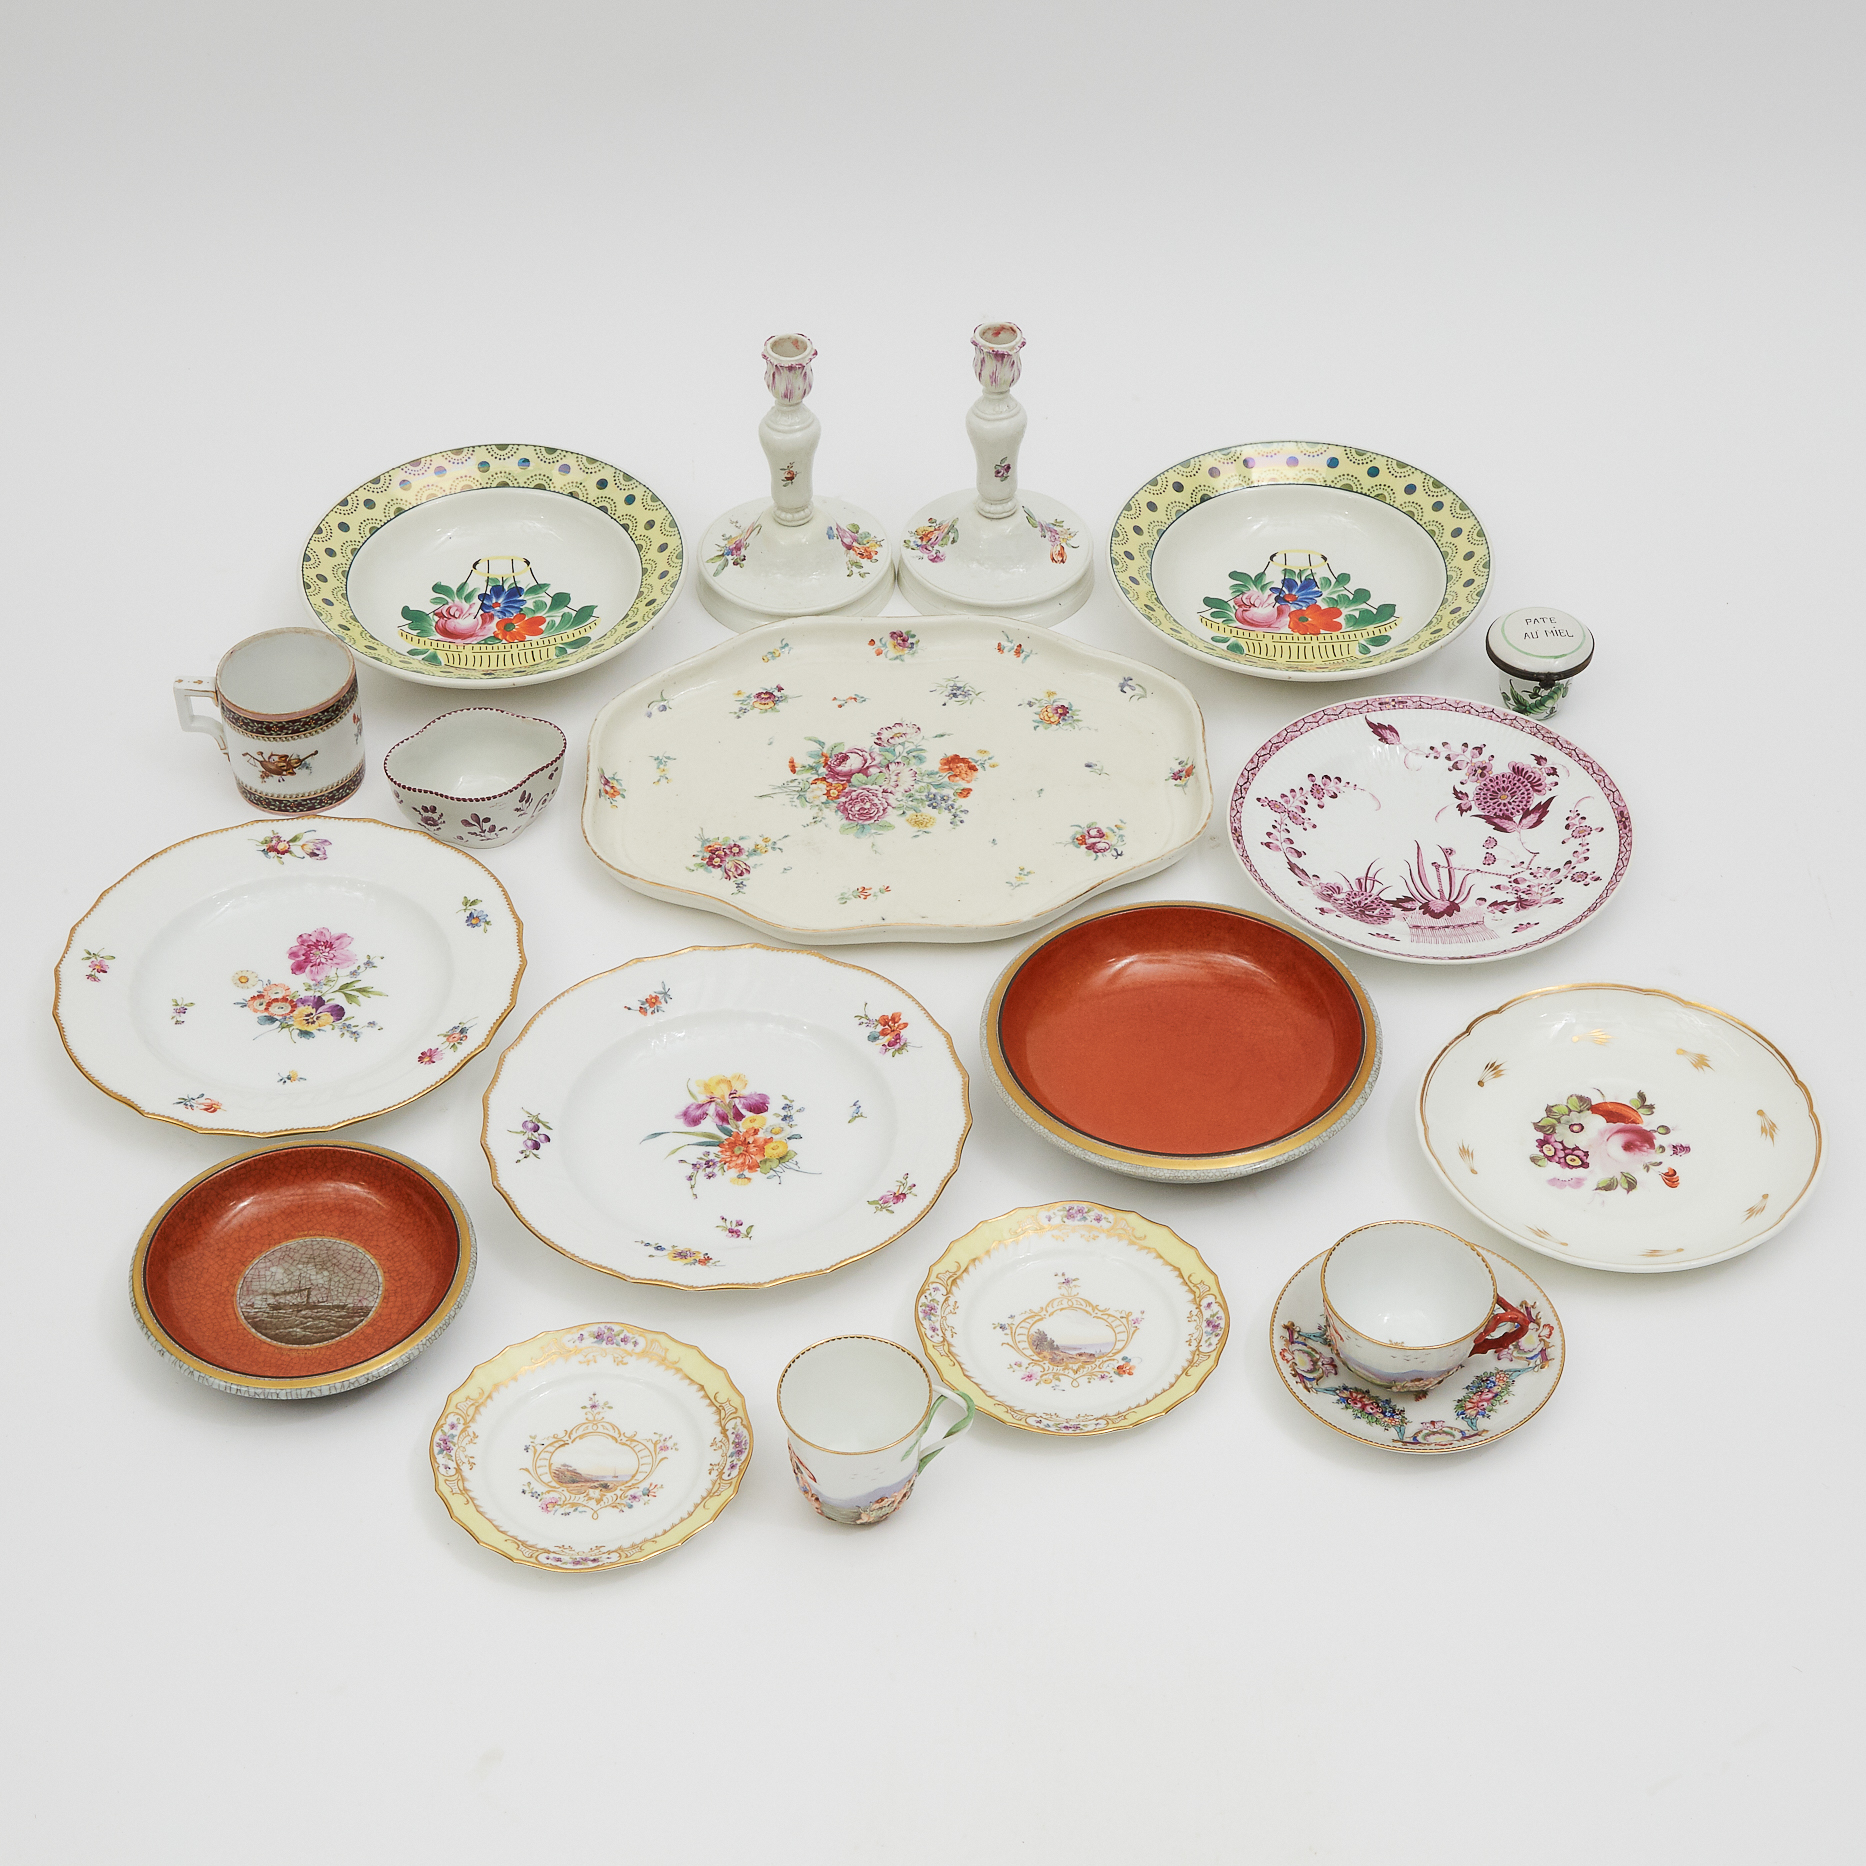 Group of Continental Pottery and Porcelain, mainly 19th century